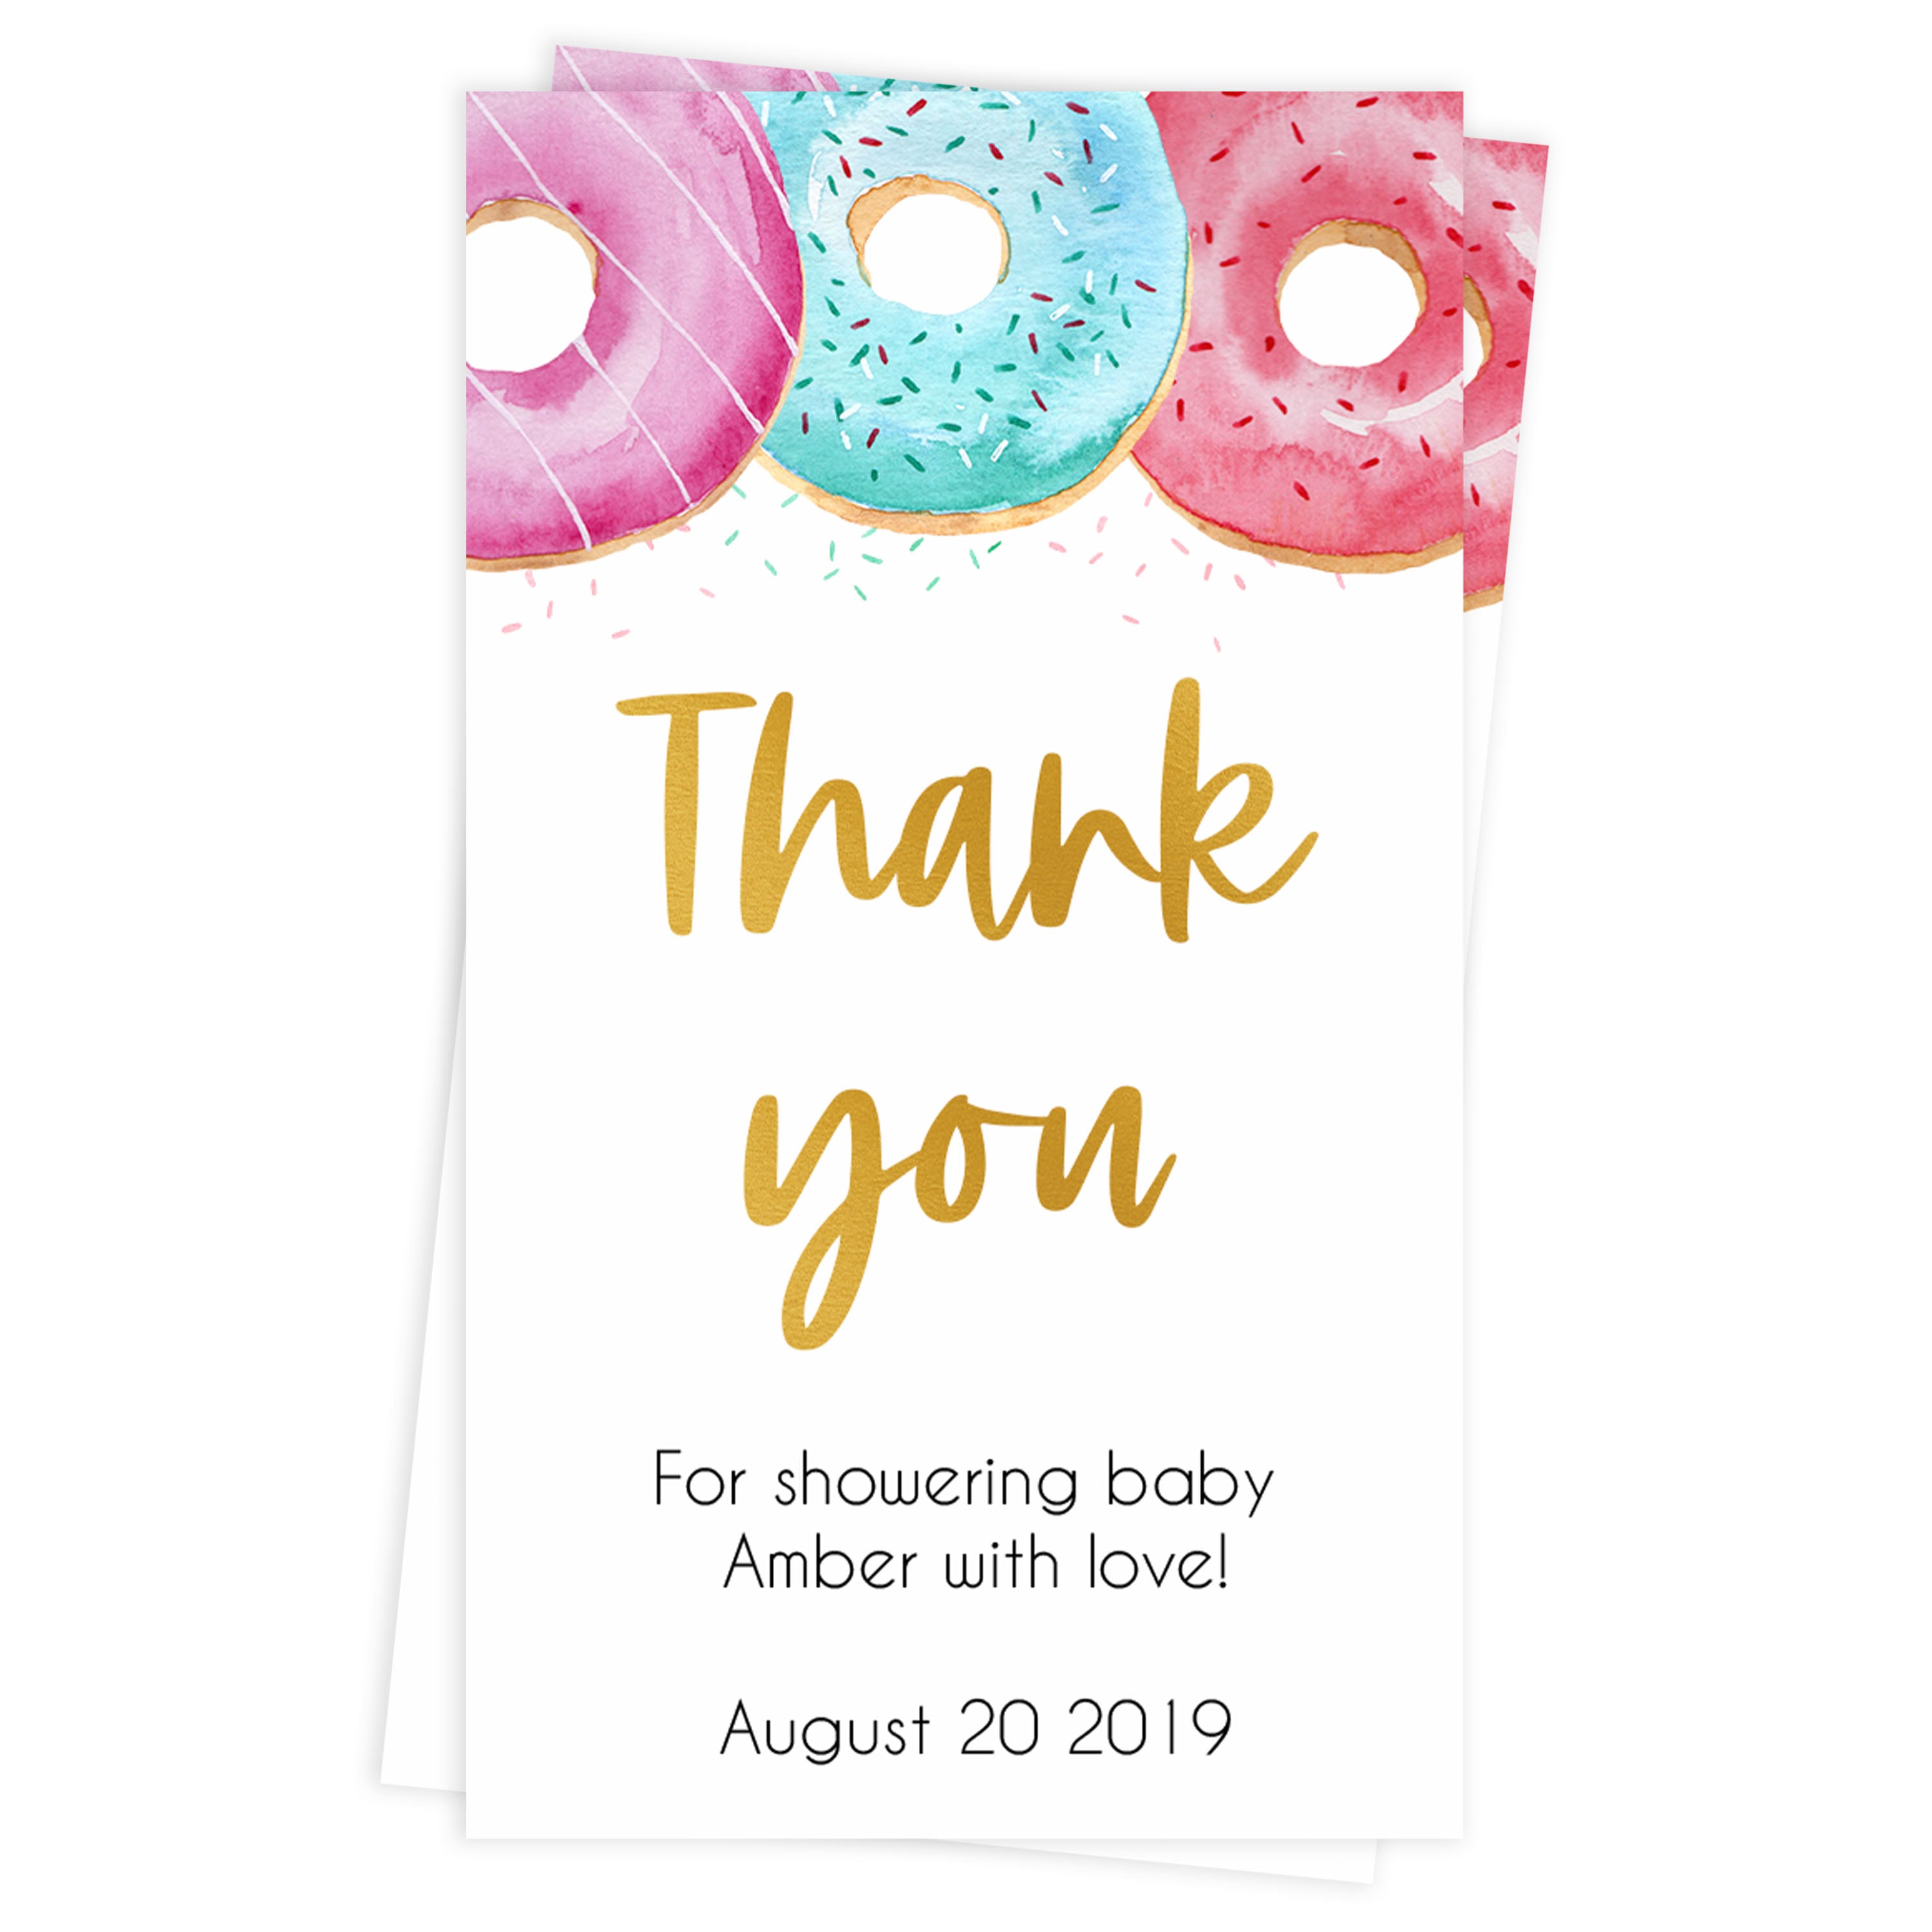 editable thank you tags, baby thank you tags, Printable baby shower games, donut baby games, baby shower games, fun baby shower ideas, top baby shower ideas, donut sprinkles baby shower, baby shower games, fun donut baby shower ideas